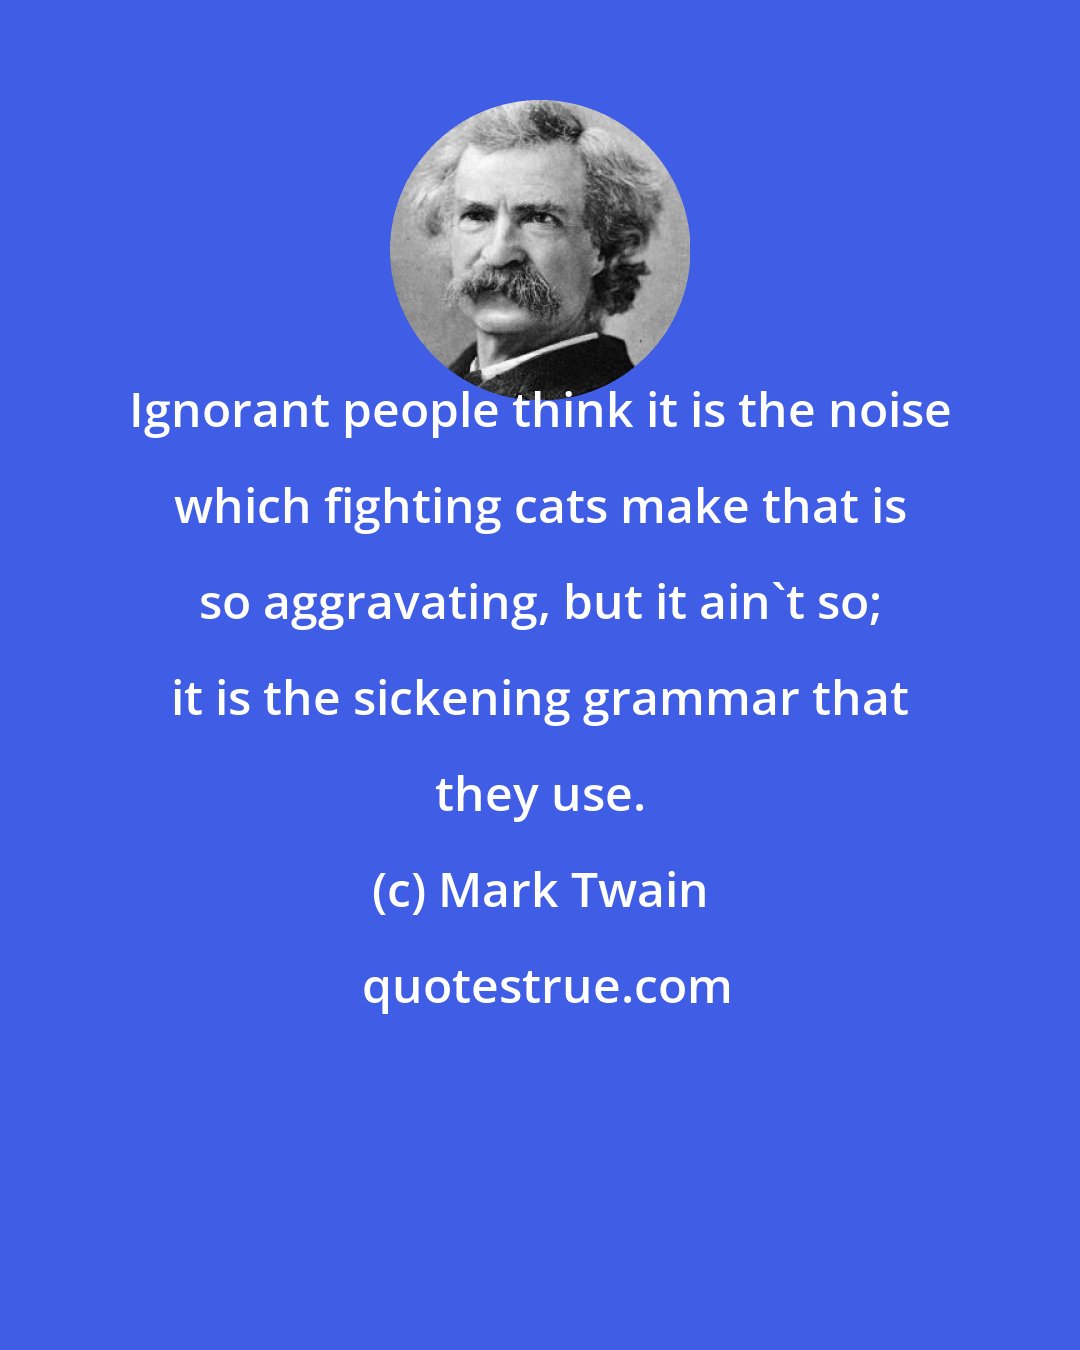 Mark Twain: Ignorant people think it is the noise which fighting cats make that is so aggravating, but it ain't so; it is the sickening grammar that they use.